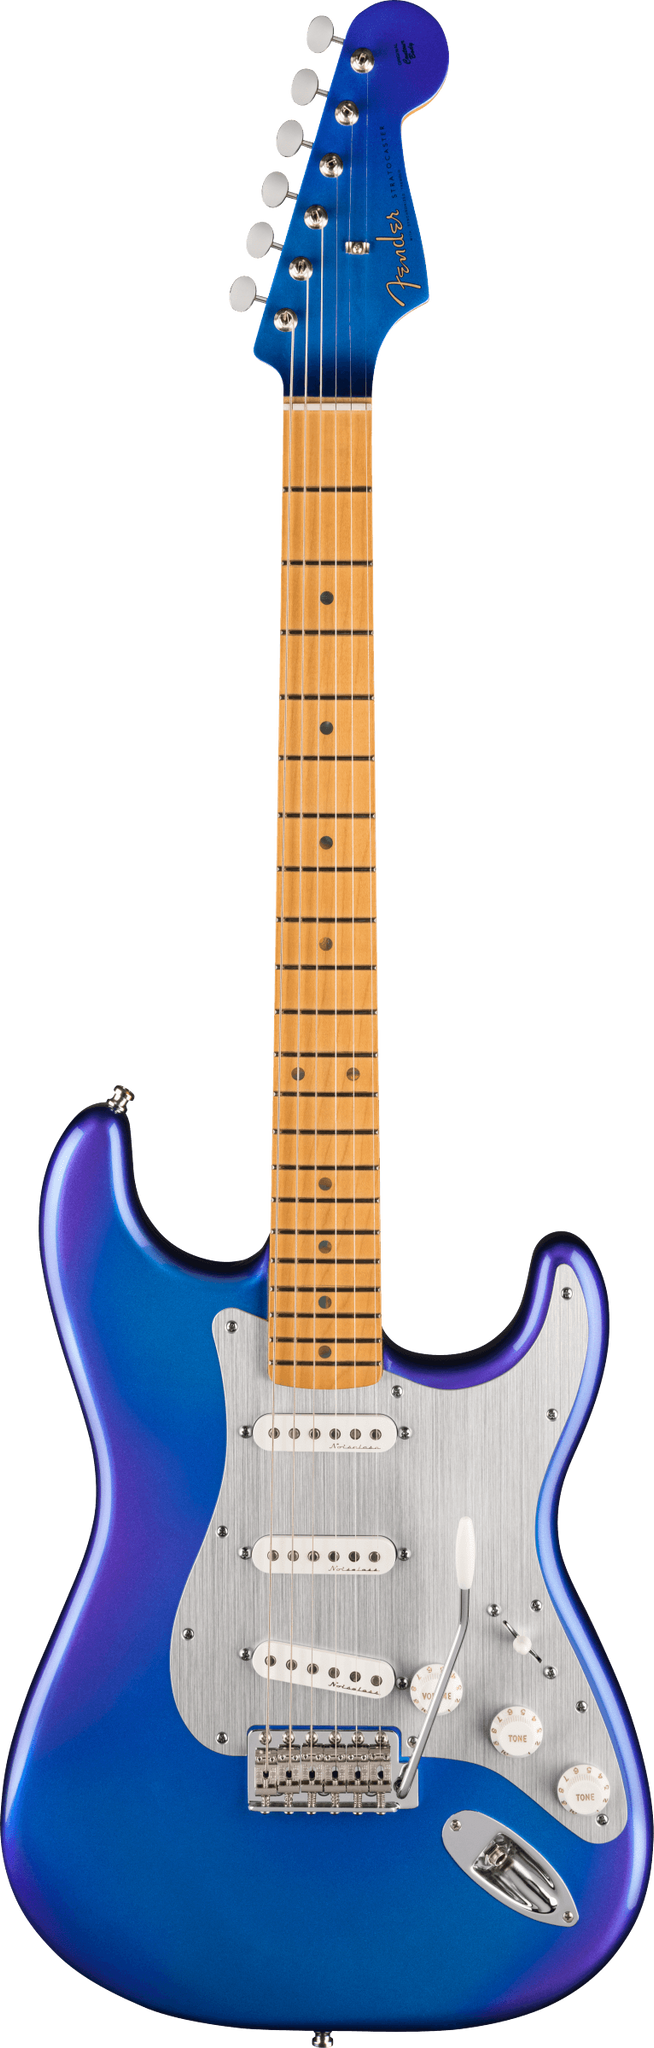 Fender Limited Edition H.E.R. Stratocaster Electric Guitar - Blue